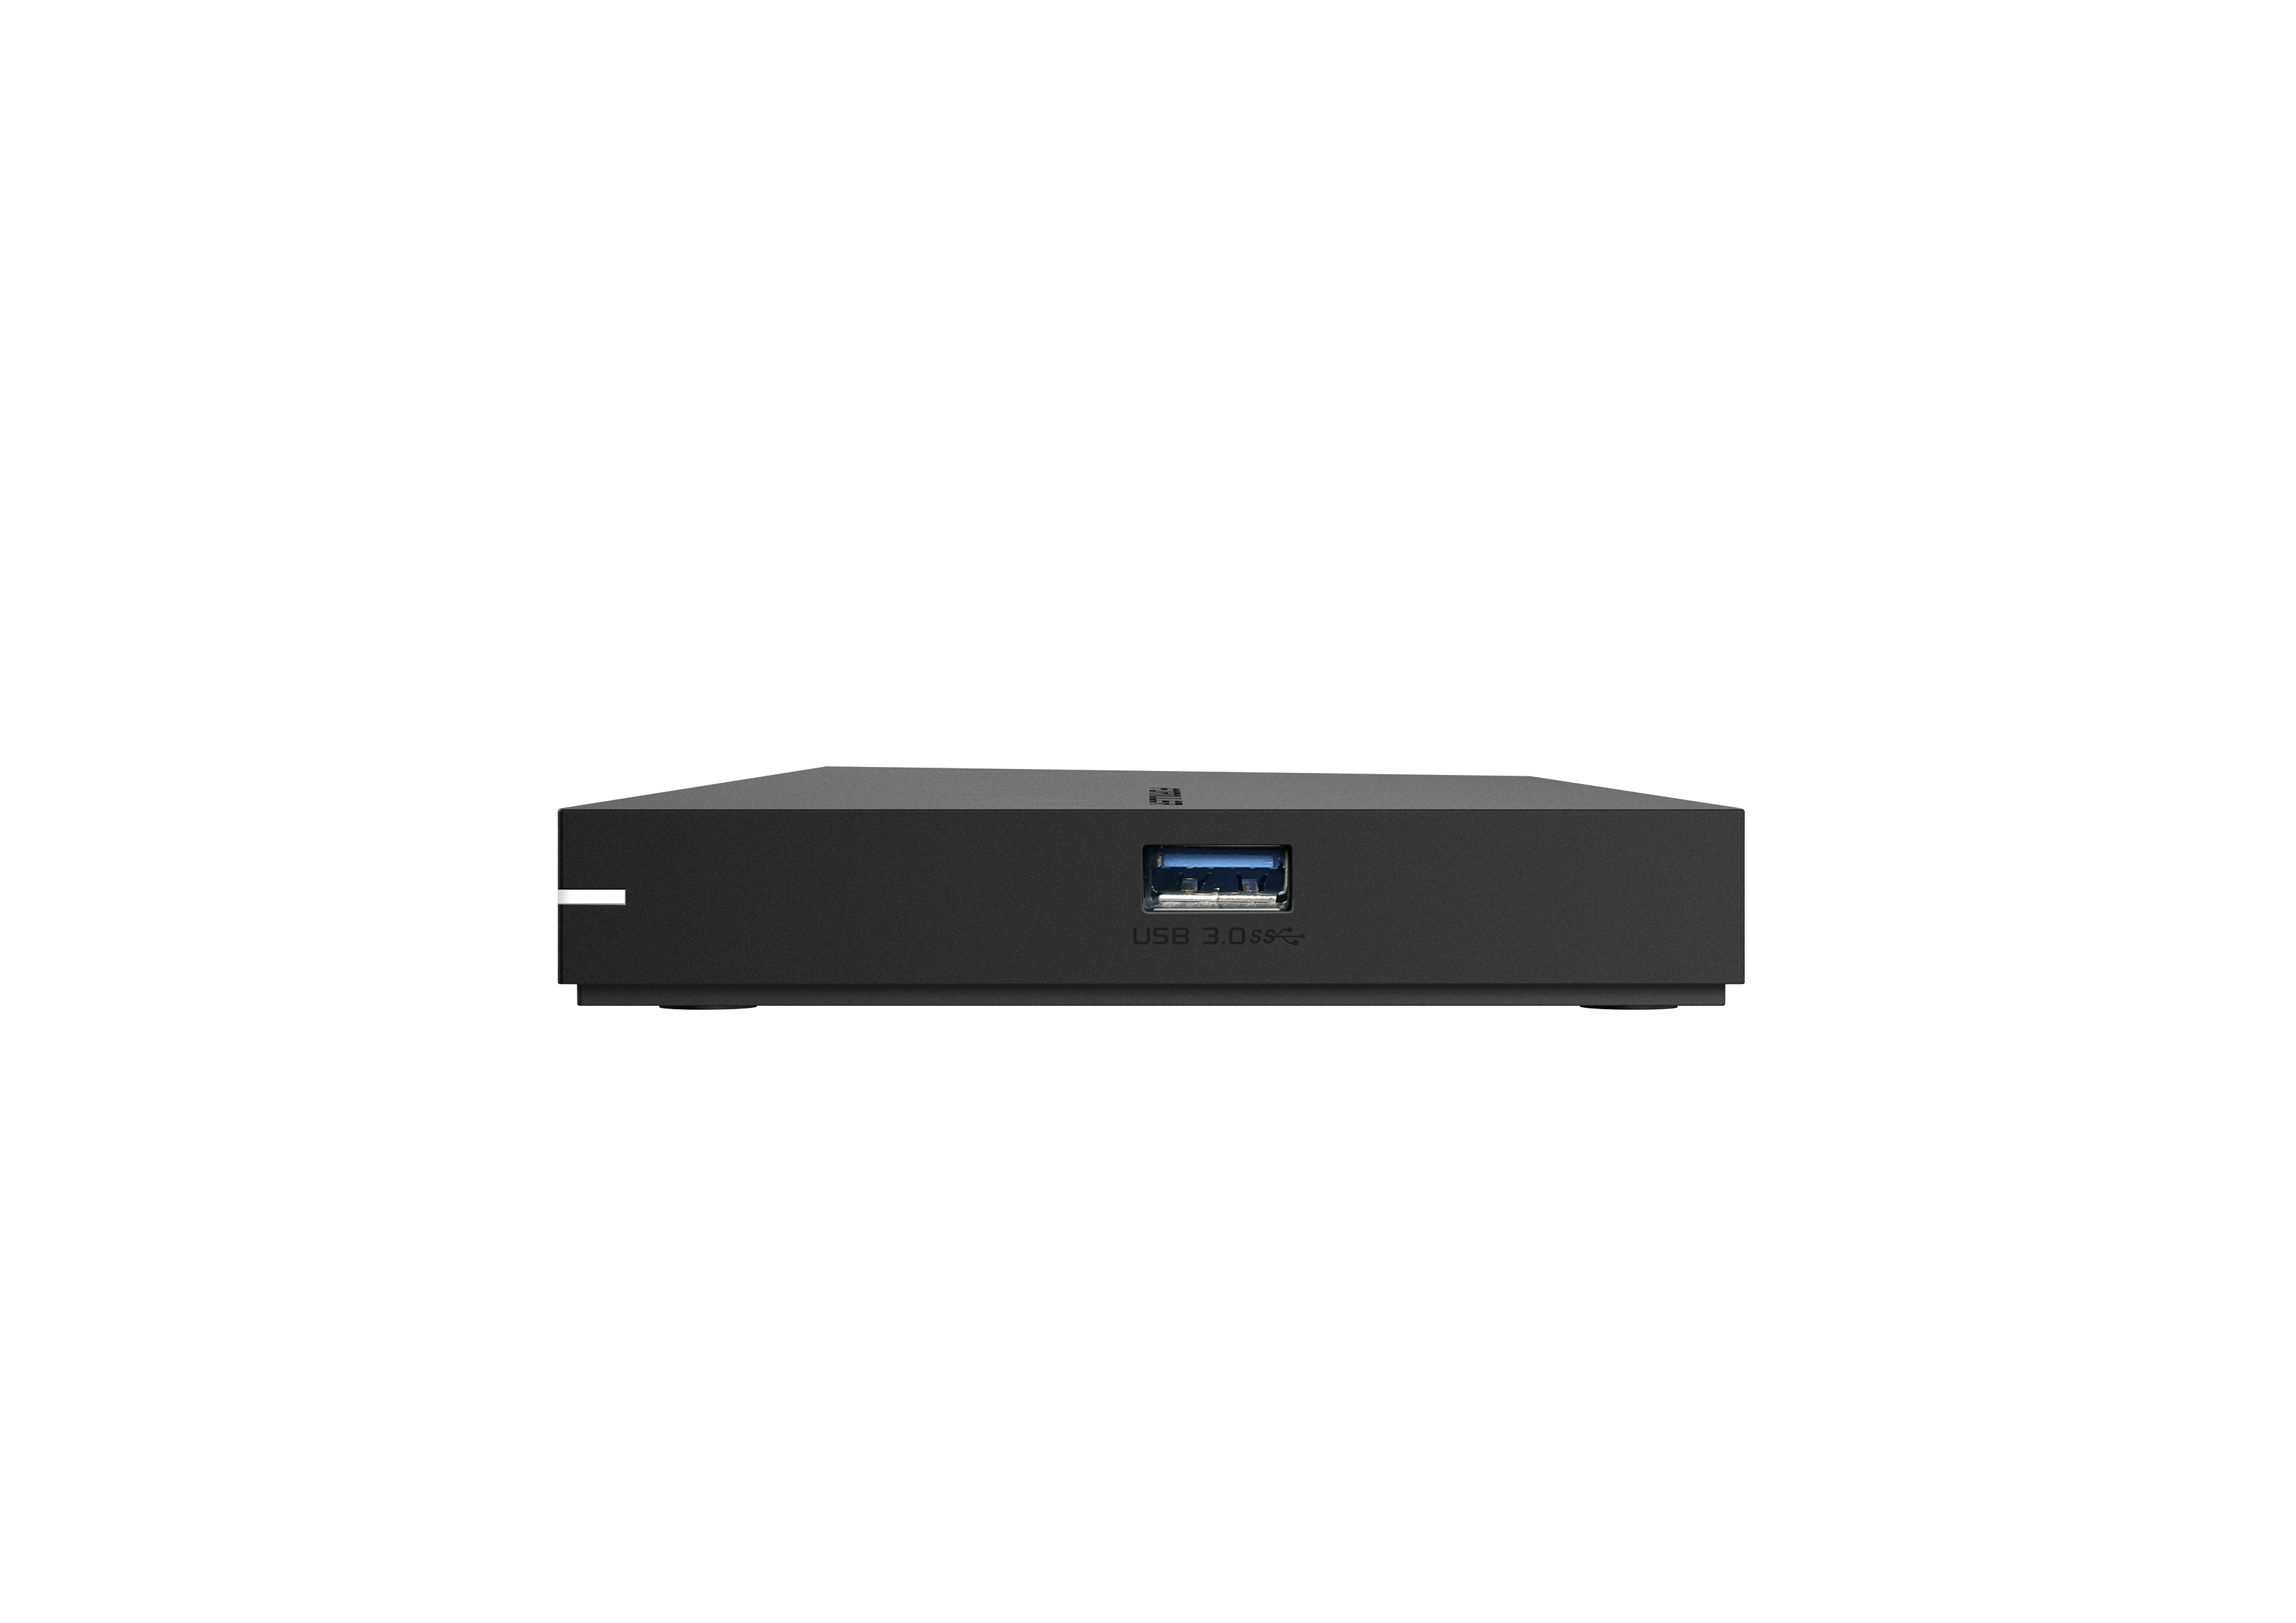 Formuler Z11 Pro 4K UHD Android 10 IP-Receiver (HDR10, Bluetooth, Dual-WiFi, HDMI, USB 3.0, MicroSD)